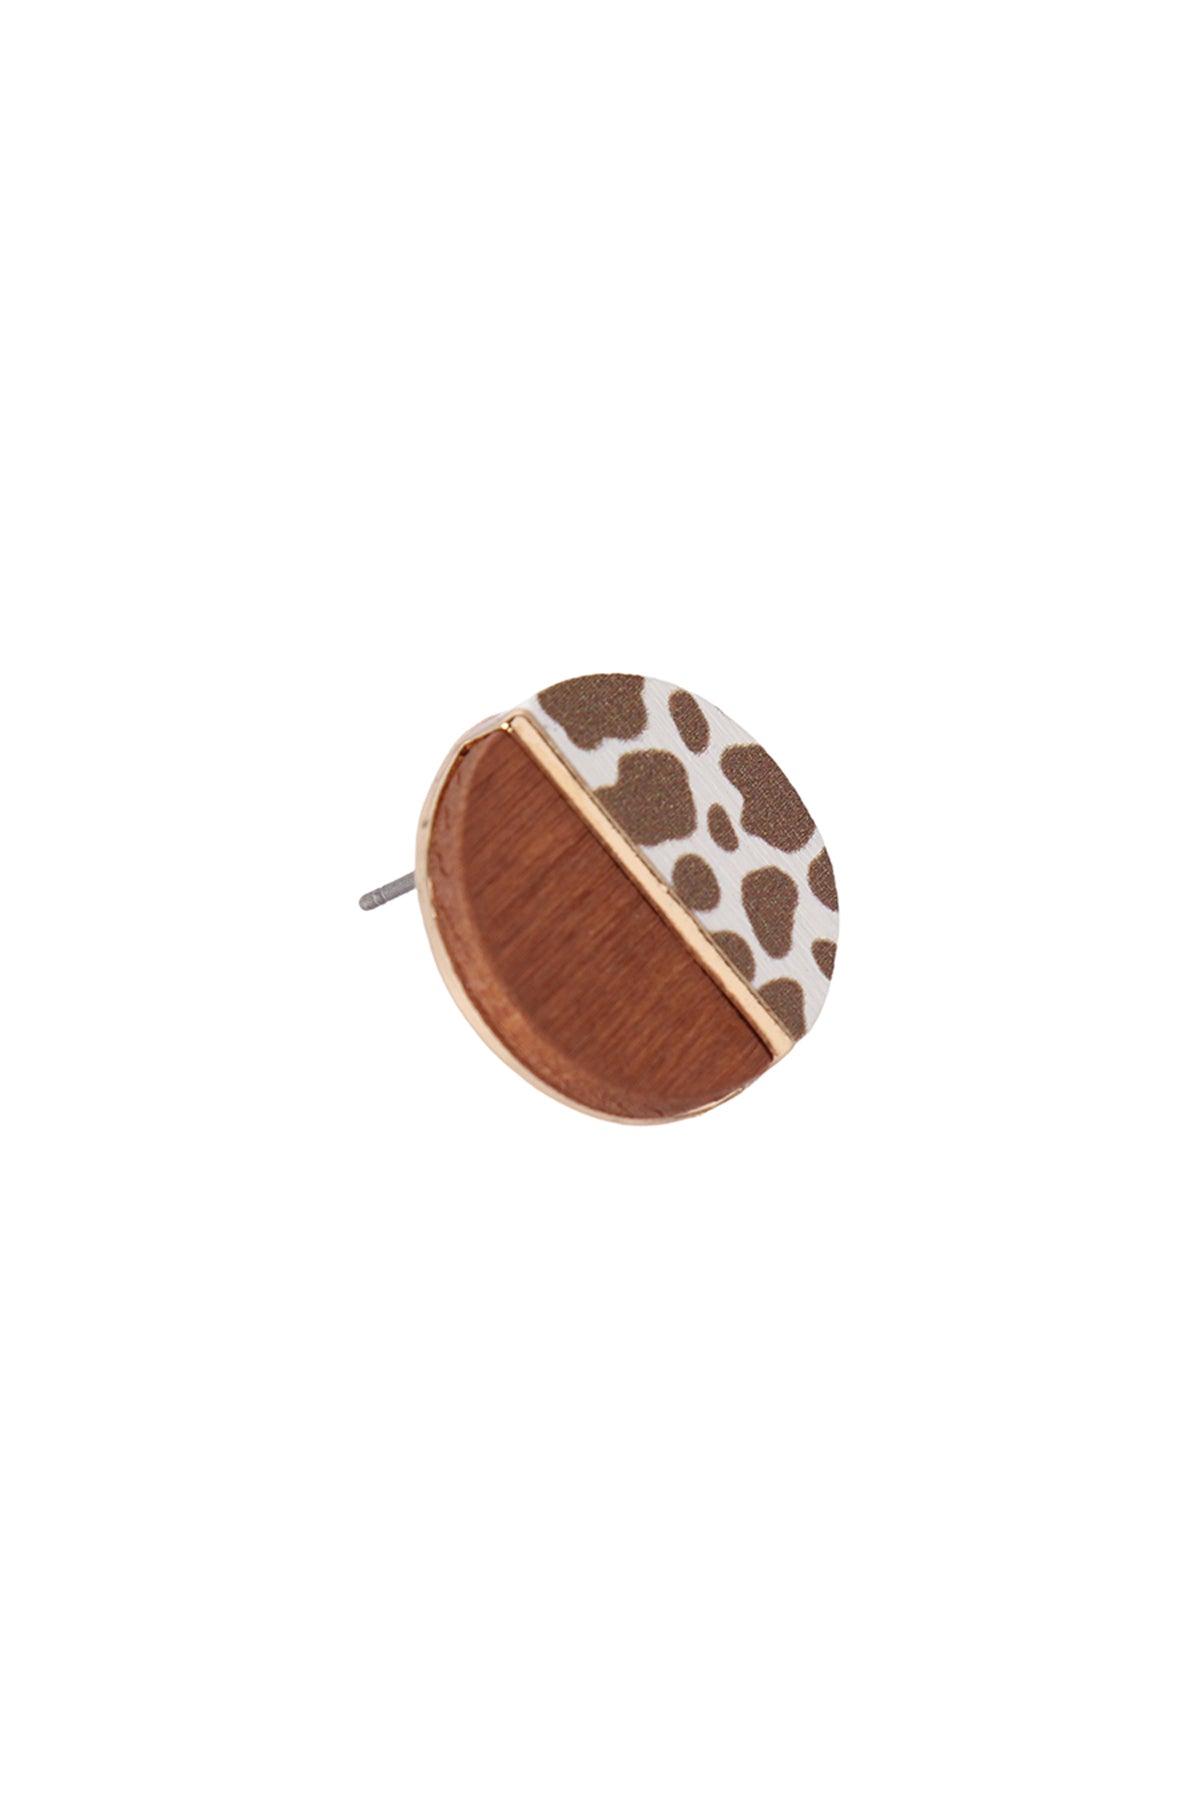 ROUND WOOD TWO TONE STUD EARRING